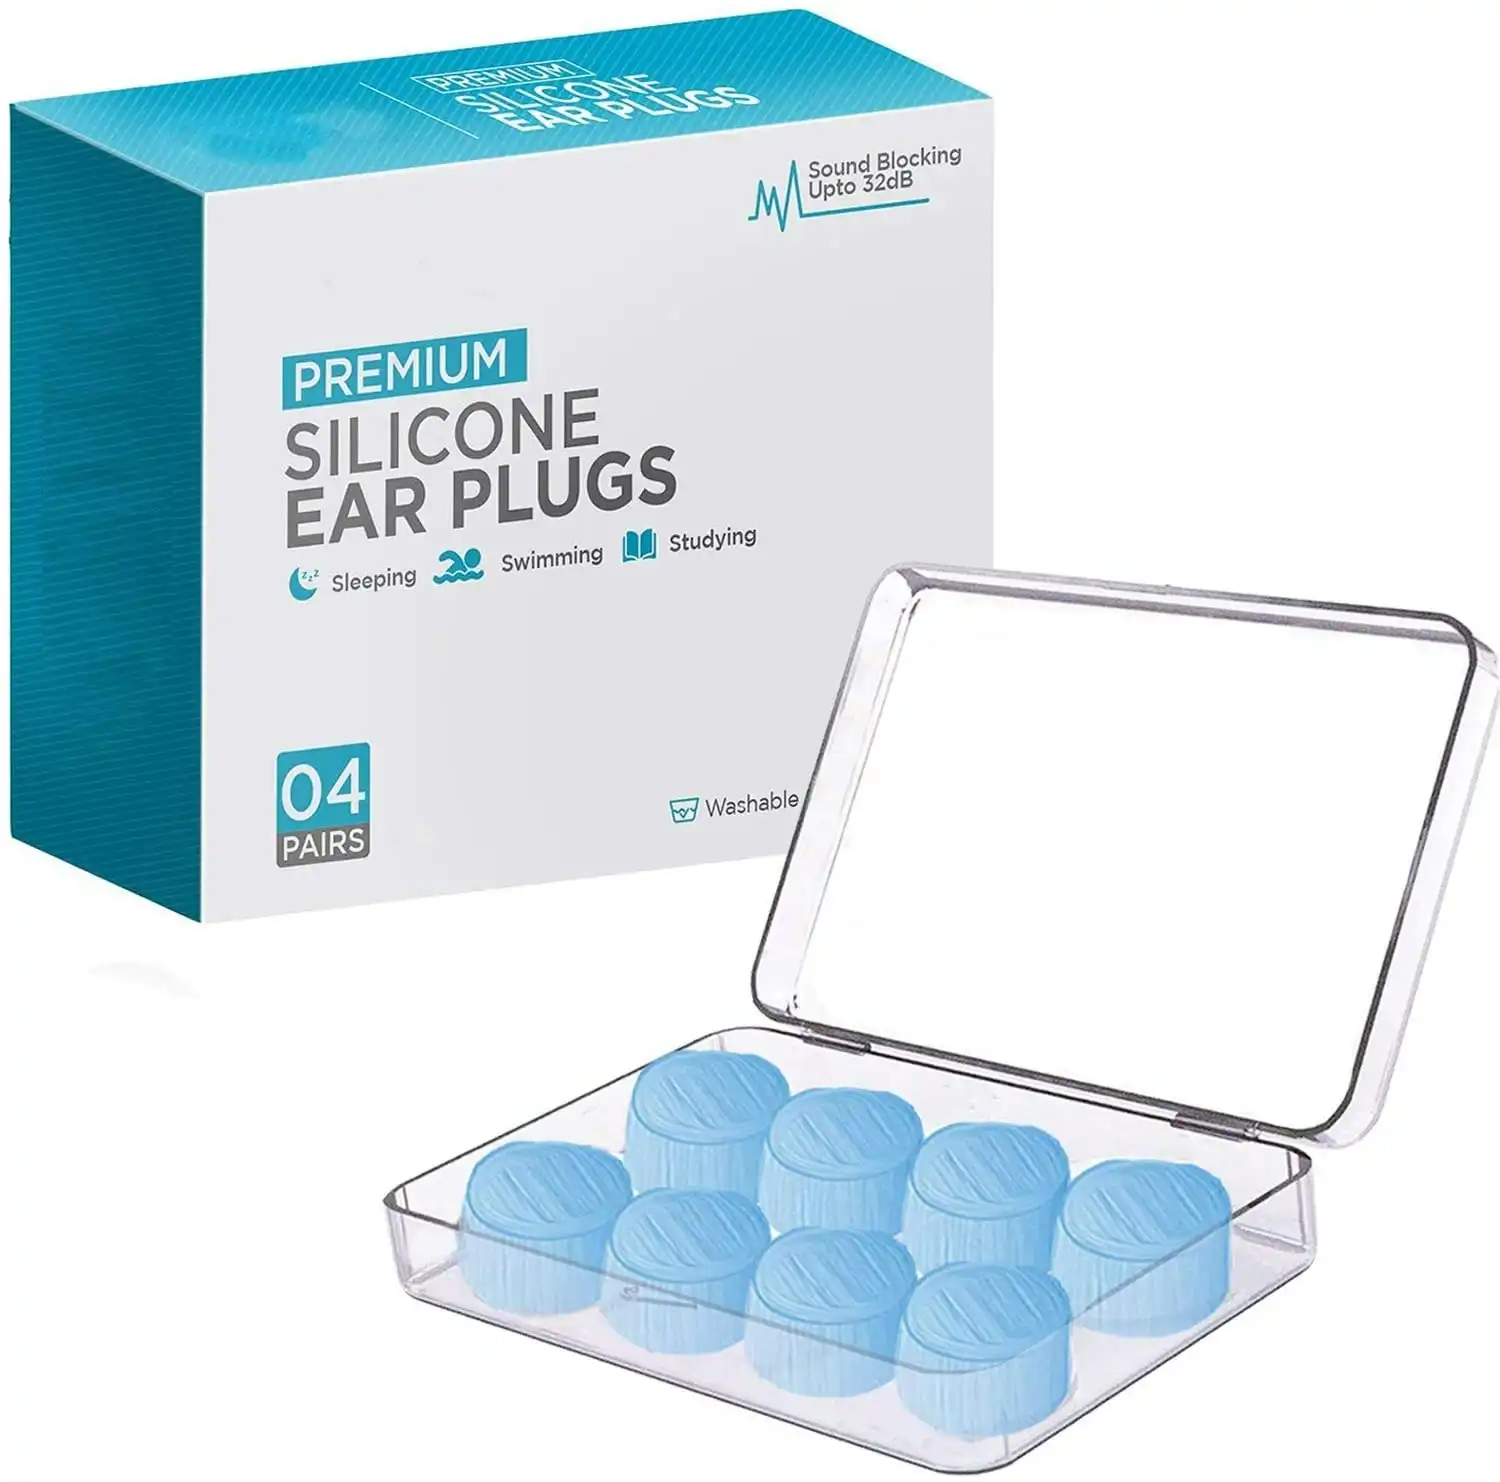 Kuyax Ear Plugs for Sleeping, Reusable Silicone Moldable Noise Cancelling Sound Blocking Reduction Earplugs for Swimming, Snoring, Concerts, Shooting,